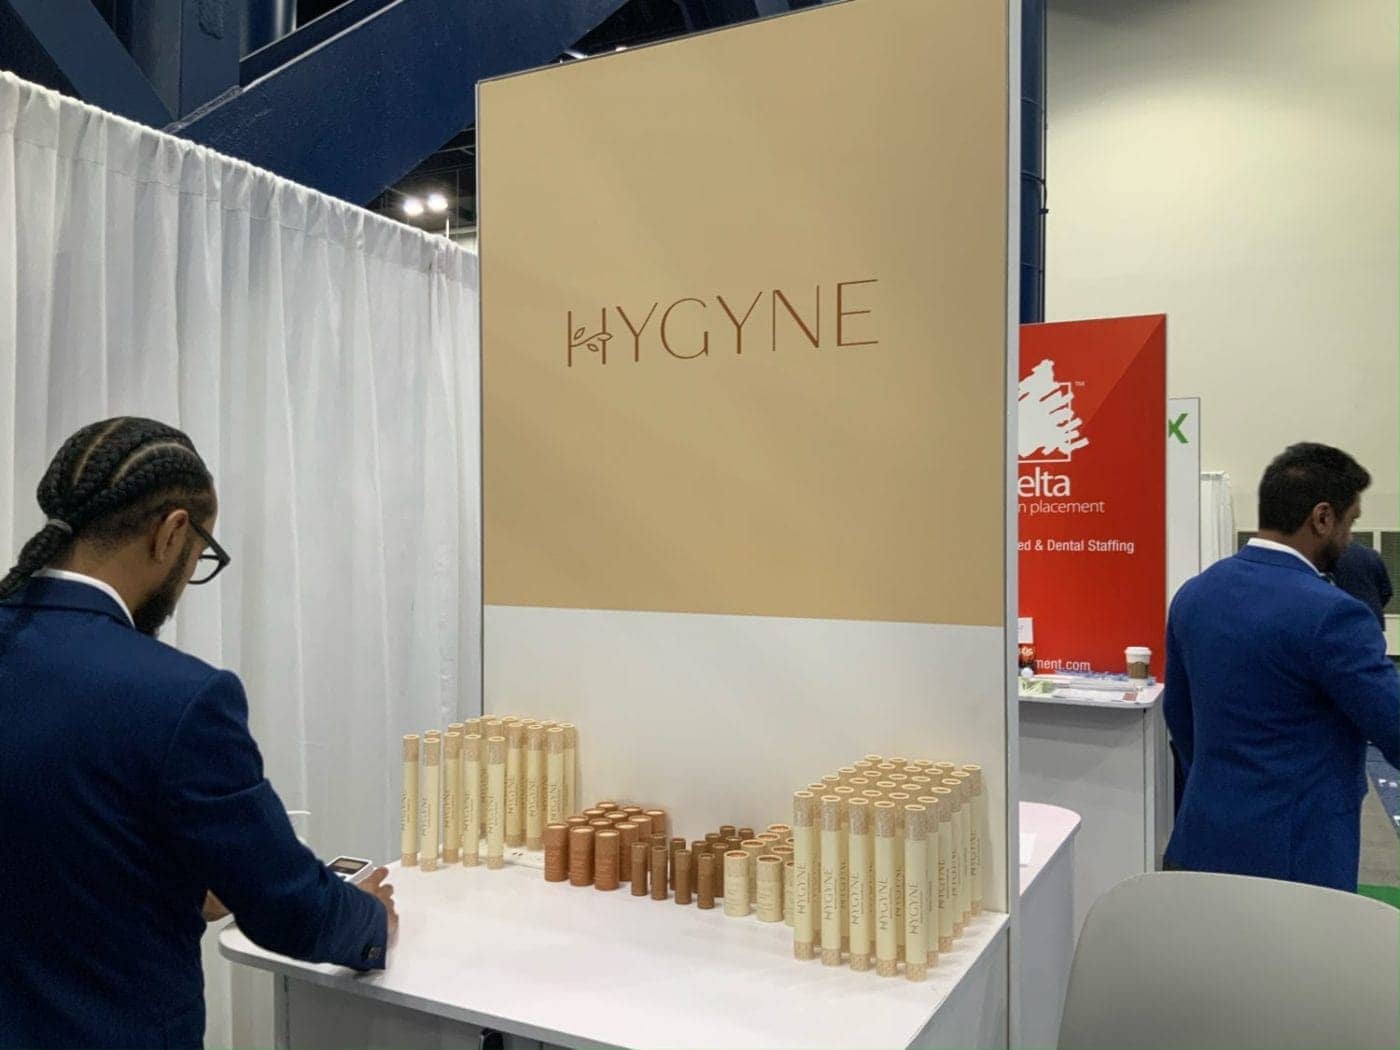 David-Barnave-and-his-hygiene-dental-product-line-HYGYNE-1400x1050, Black Owned biodegradable dental hygiene products hit the market, Businesses Local News & Views News & Views Professional Services 